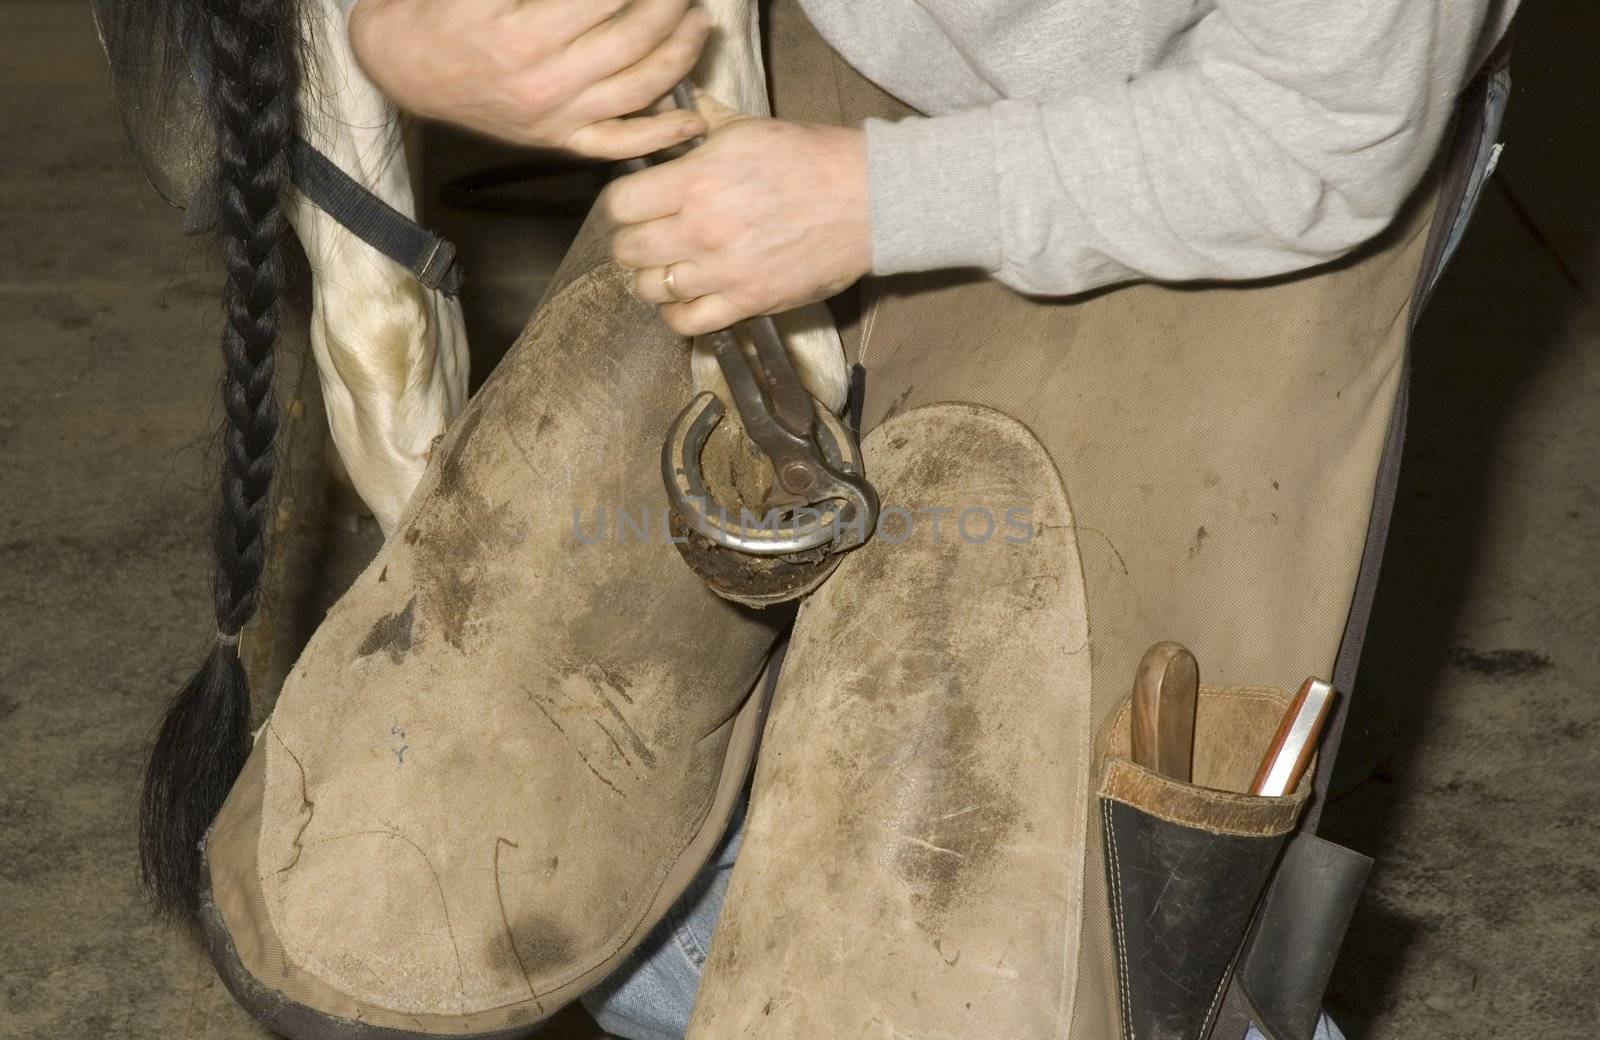 Farrier removing old shoe from horses hoof